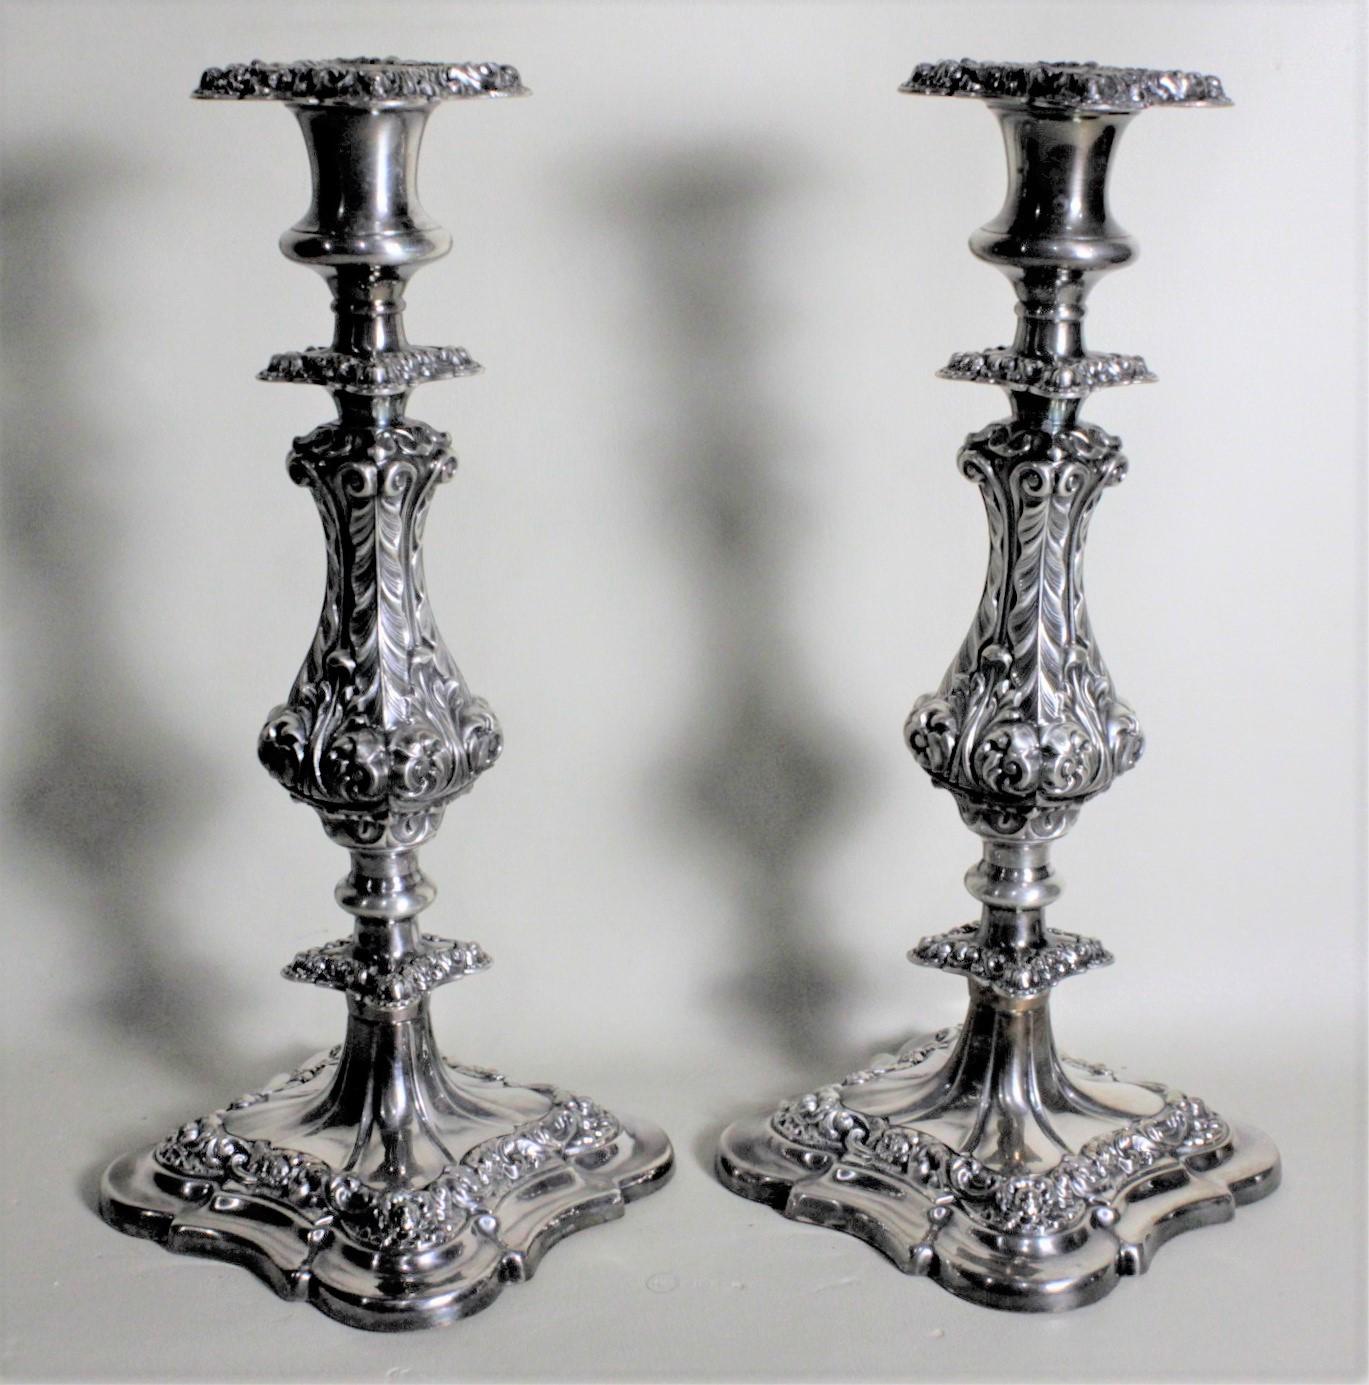 This pair of antique silver plated candlesticks were made in England, likely by Ellis & Barker, in circa 1900 in the period Edwardian style. The candlesticks are heavily chased with a stylized leaf decorative motif from the cups to the bases. Each